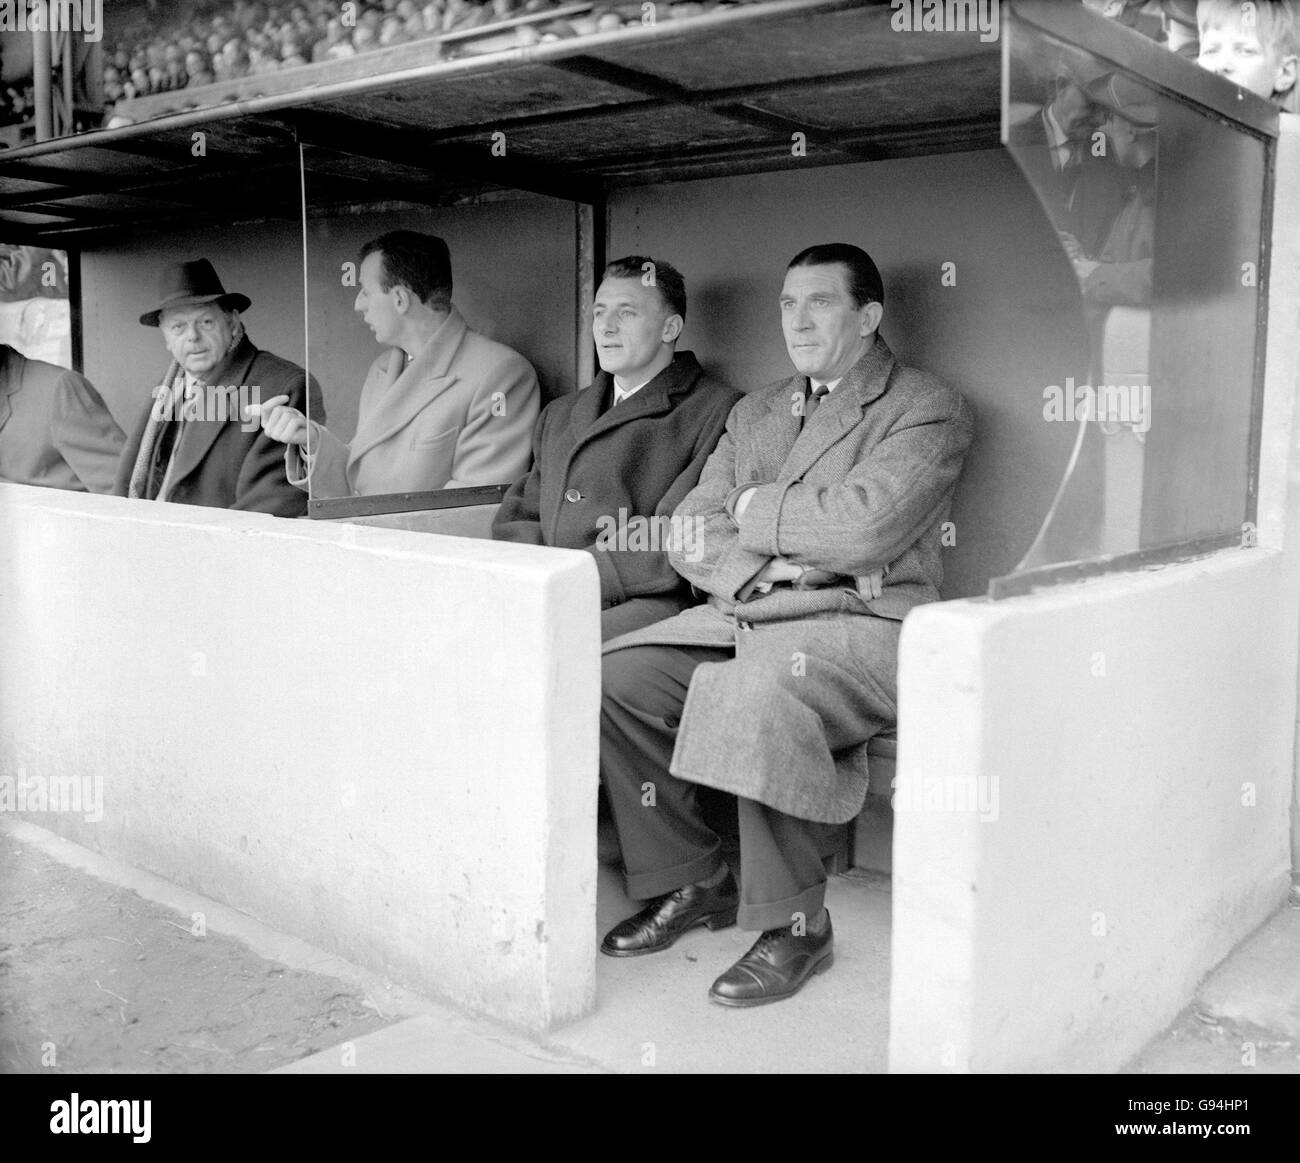 Soccer - Football League Division One - Chelsea v Blackpool - Stamford Bridge. Chelsea manager Ted Drake (r) sits alongside his new player-coach Tommy Docherty (second r) in the dugout Stock Photo